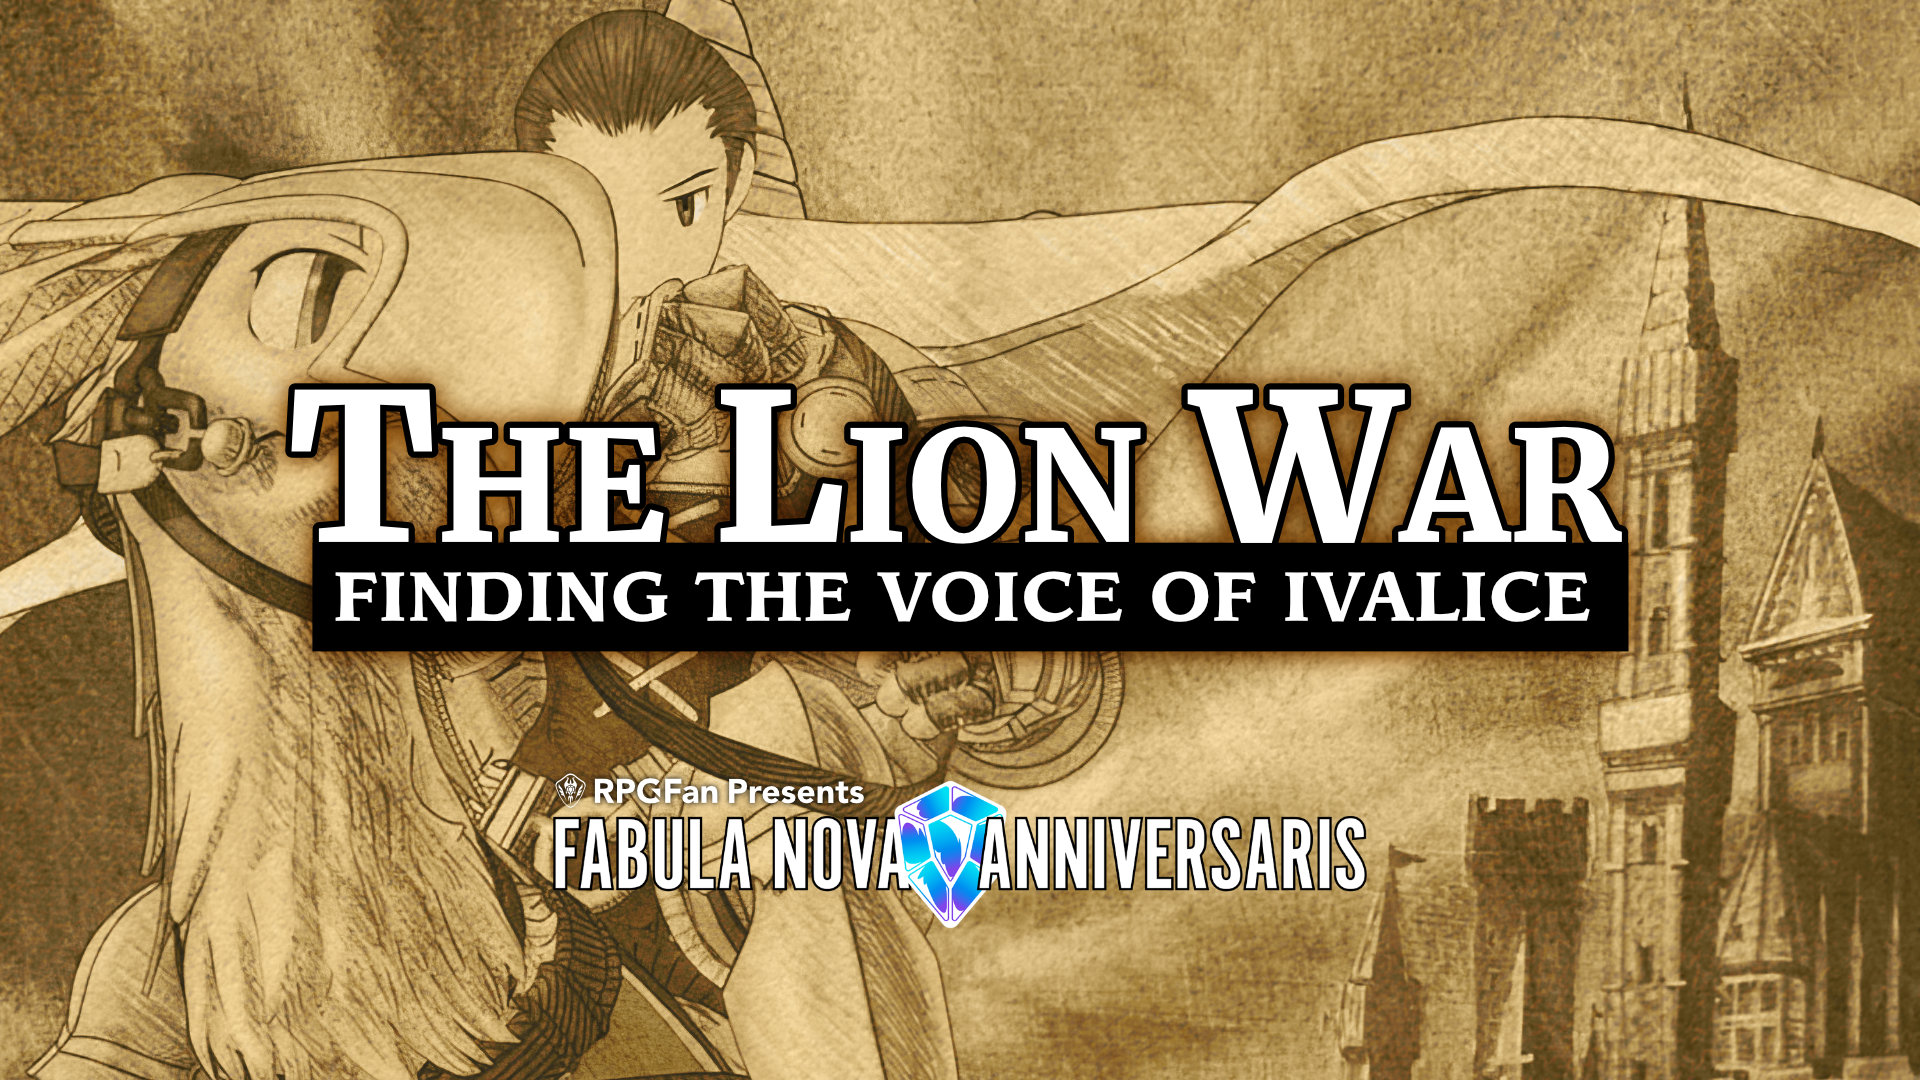 The Lion War Finding the Voice of Ivalice Featured